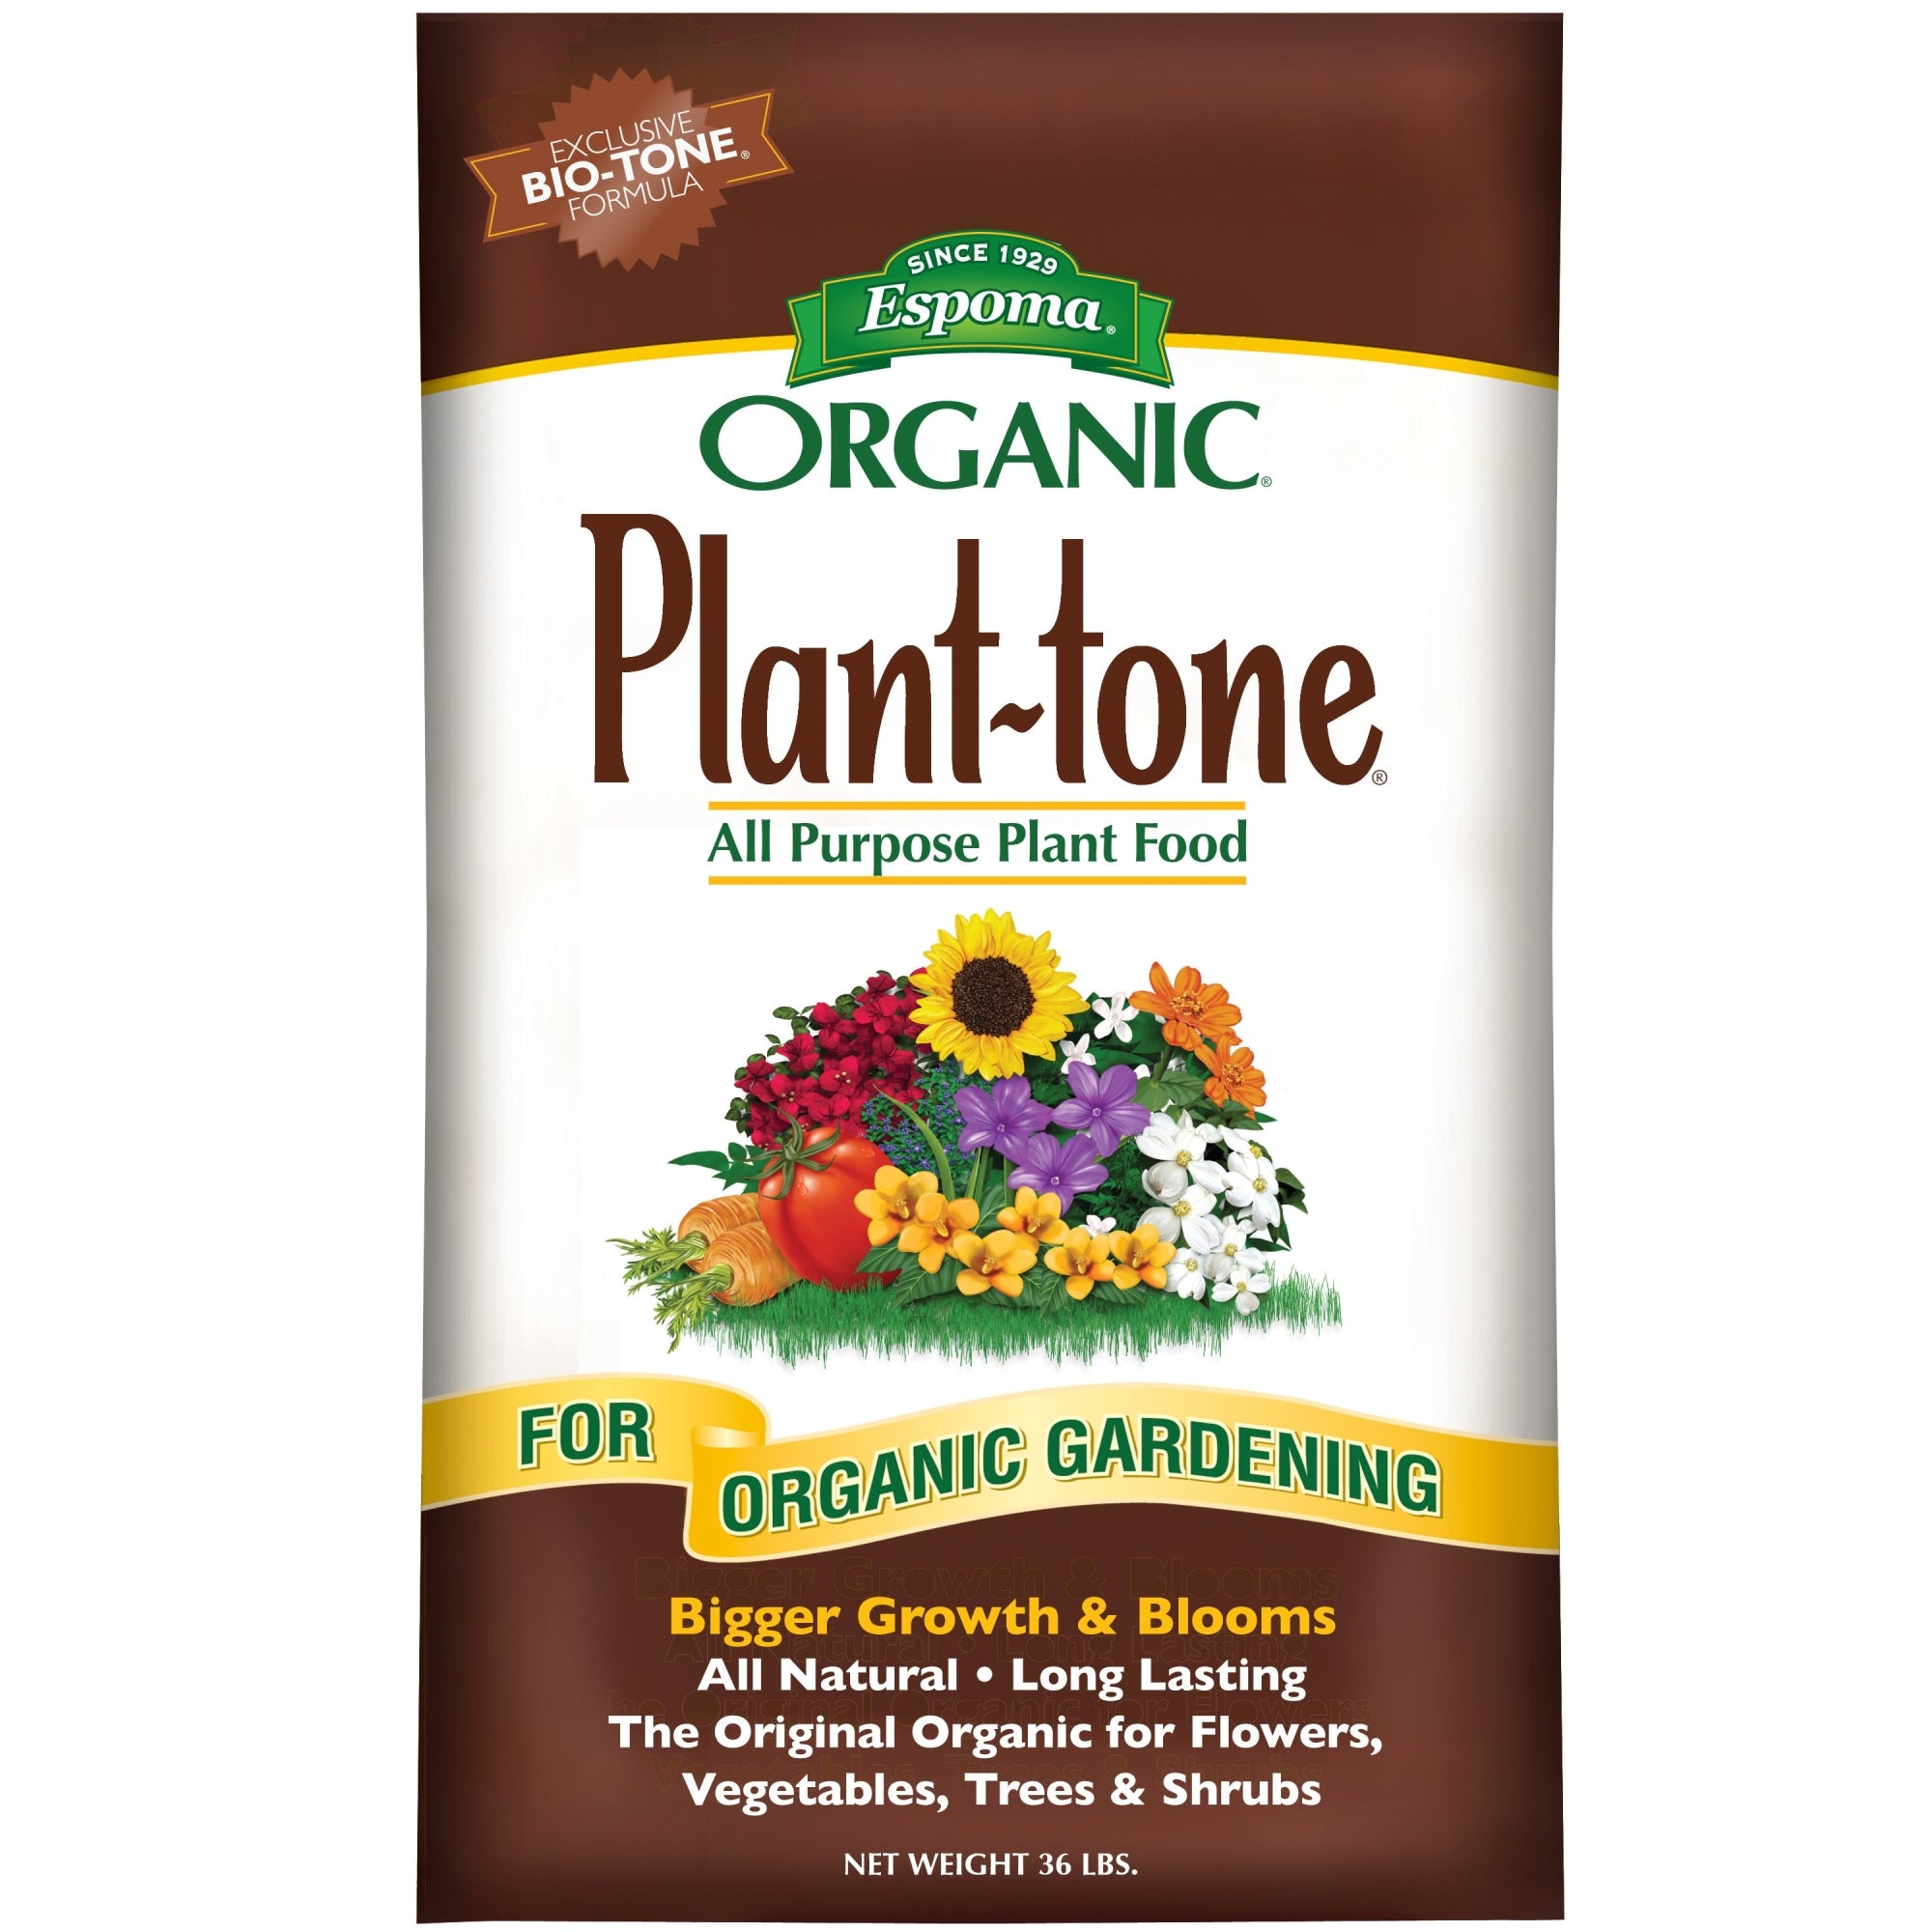 Espoma Organic Plant-tone 5-3-3 All Purpose Plant Food for Organic Gardening, Bigger Growth & Blooms for Flowers, Vegetables, Trees, and Shrubs